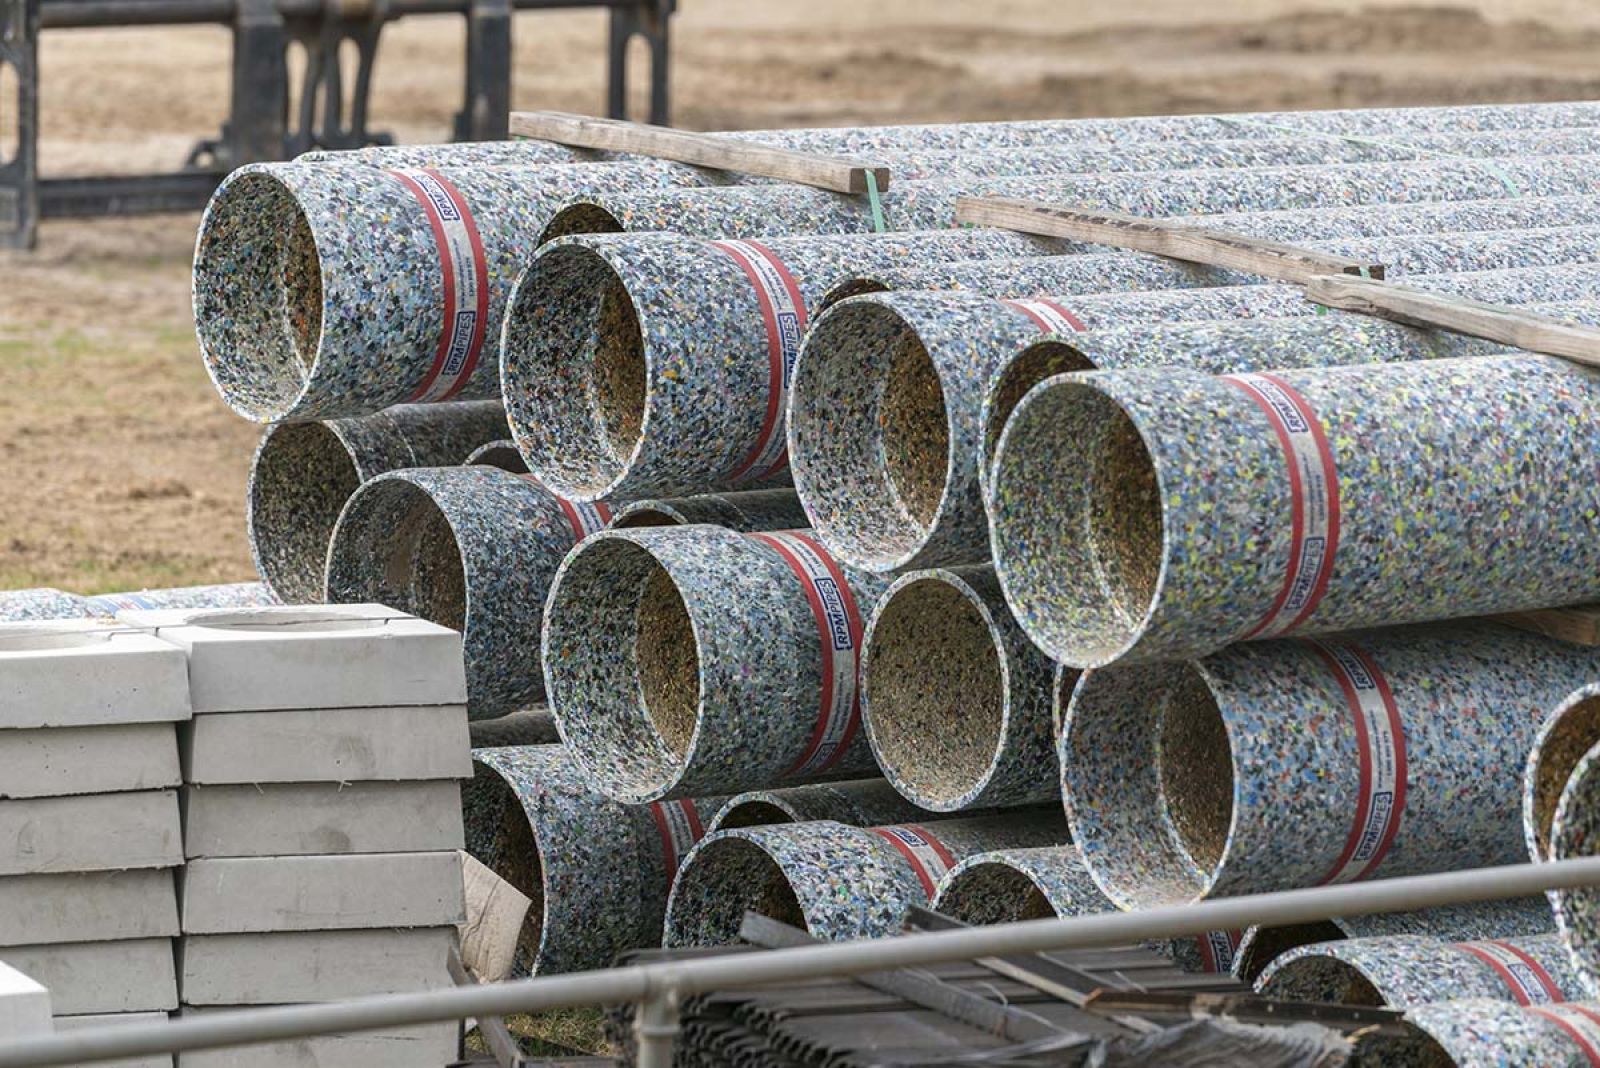 Recycled plastic drainage pipes